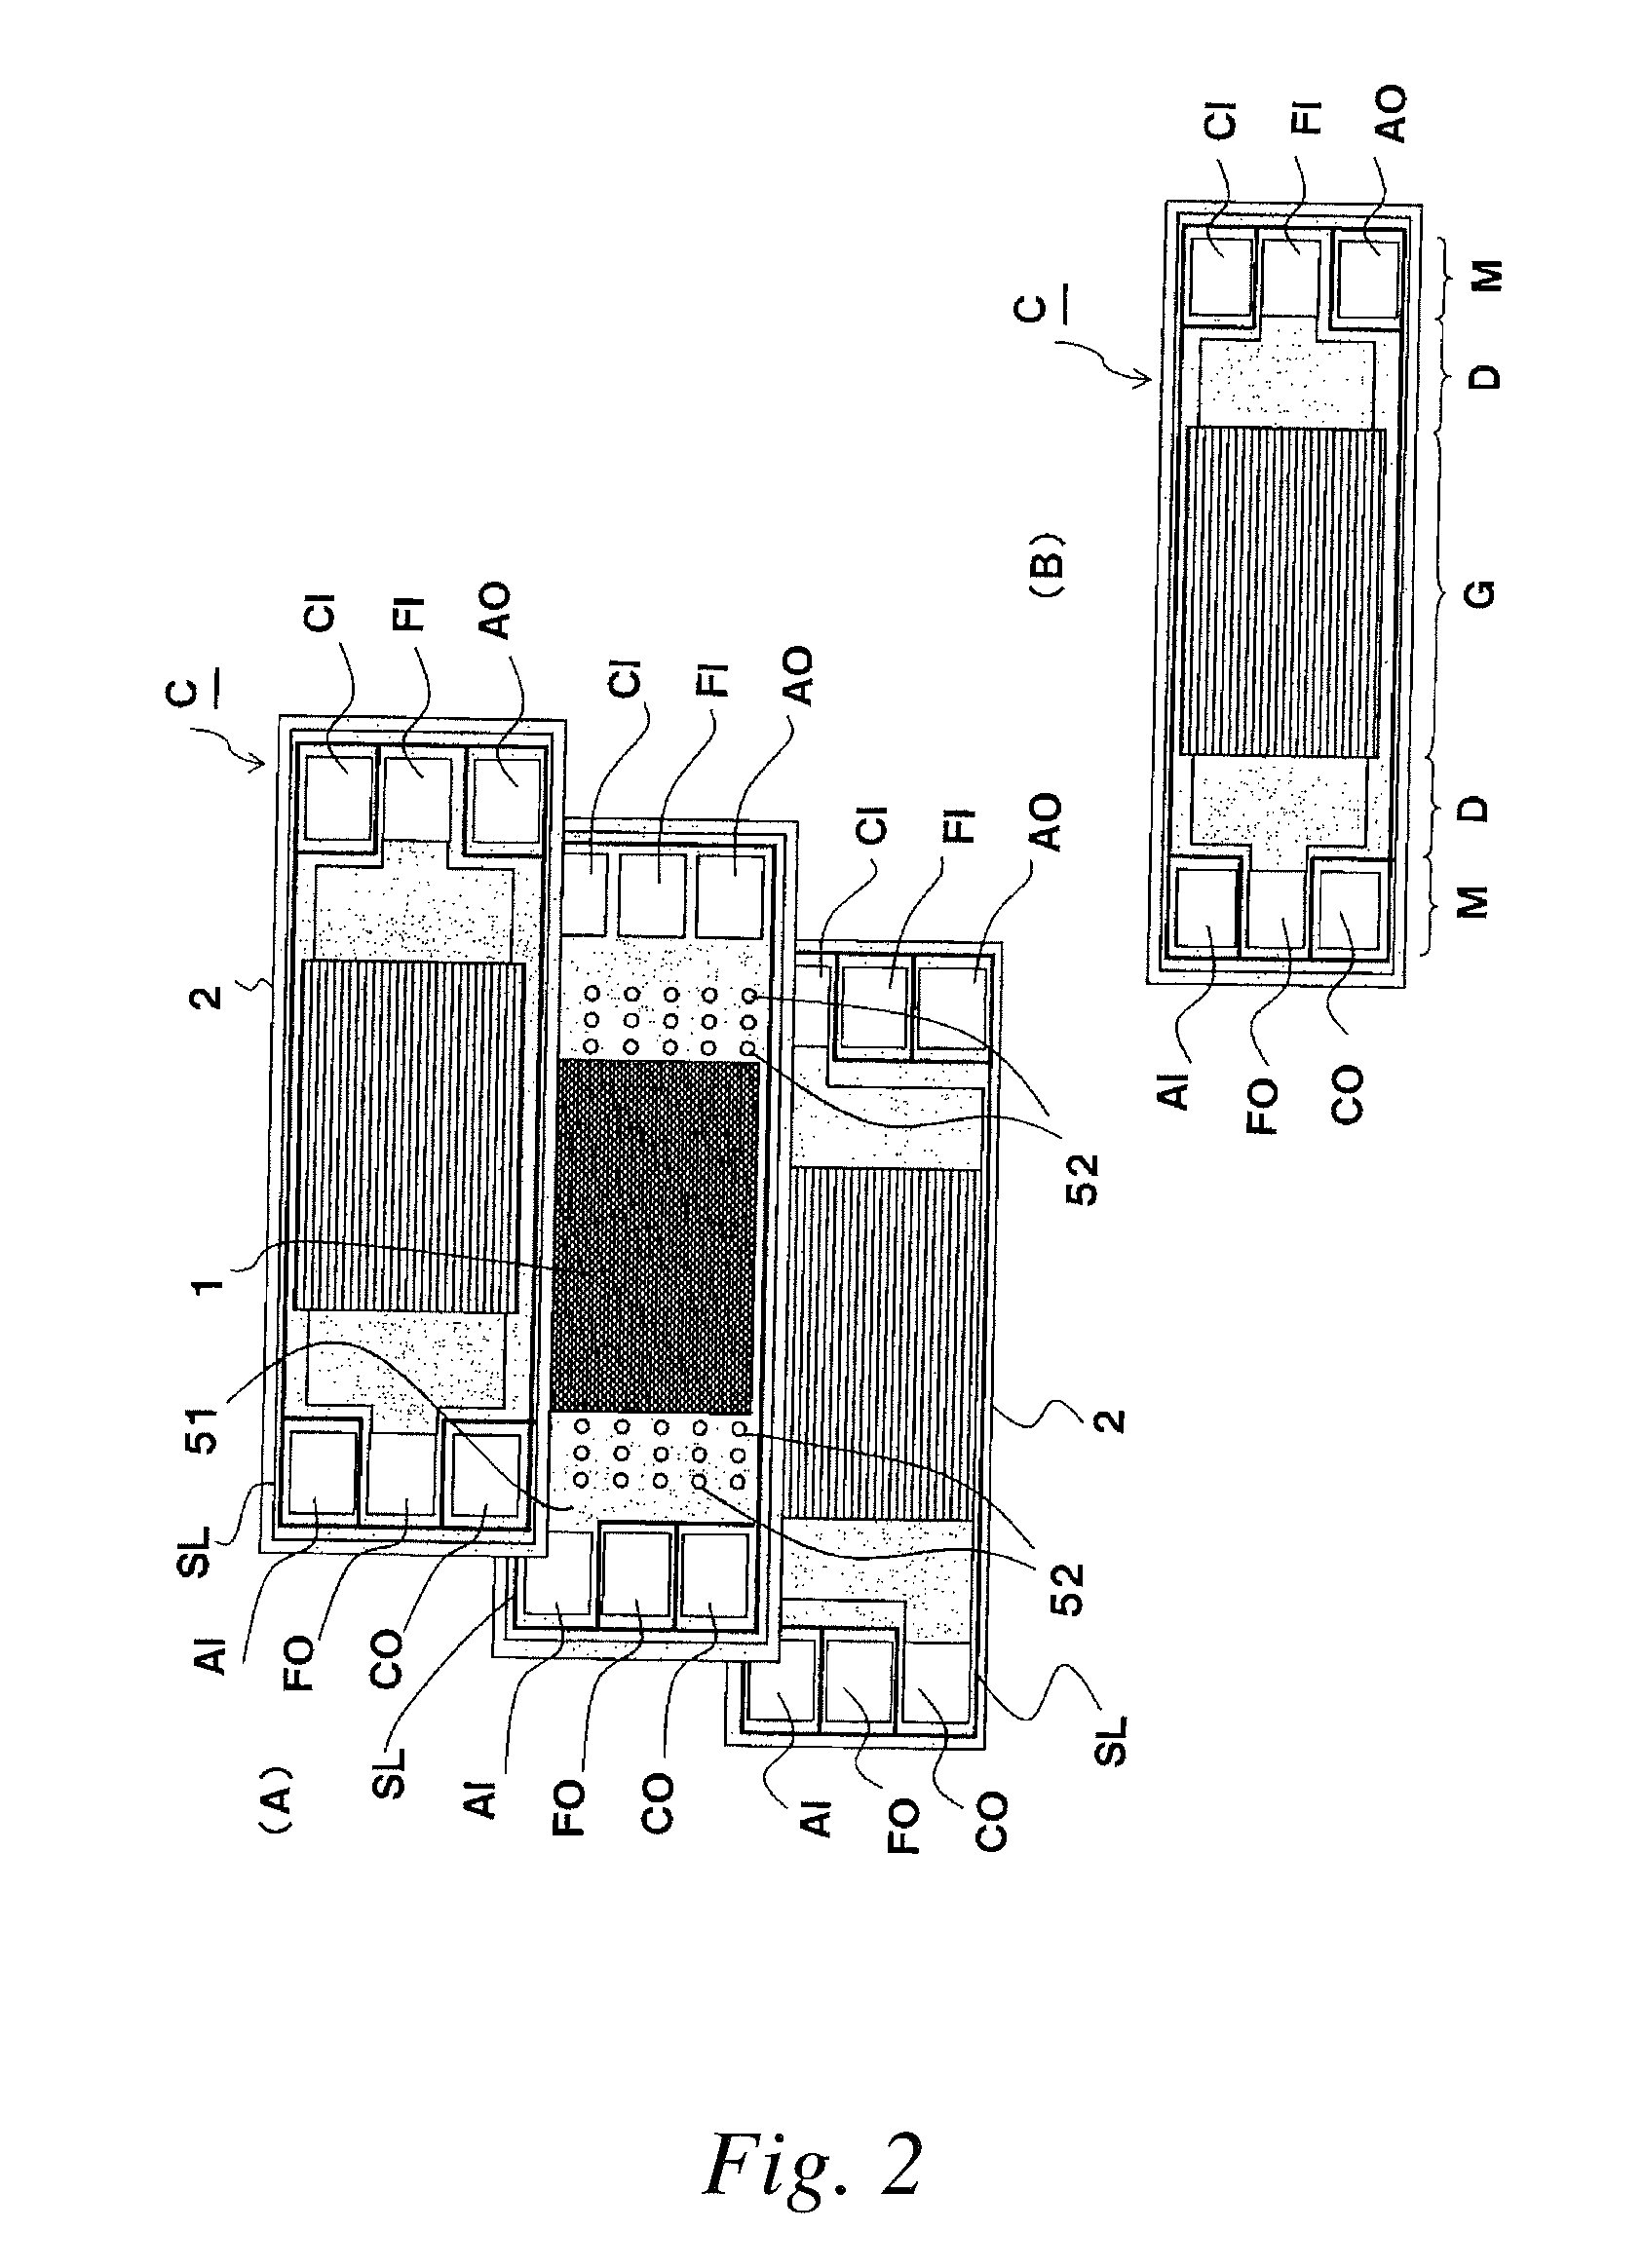 Electrode assembly for solid polymer fuel cell